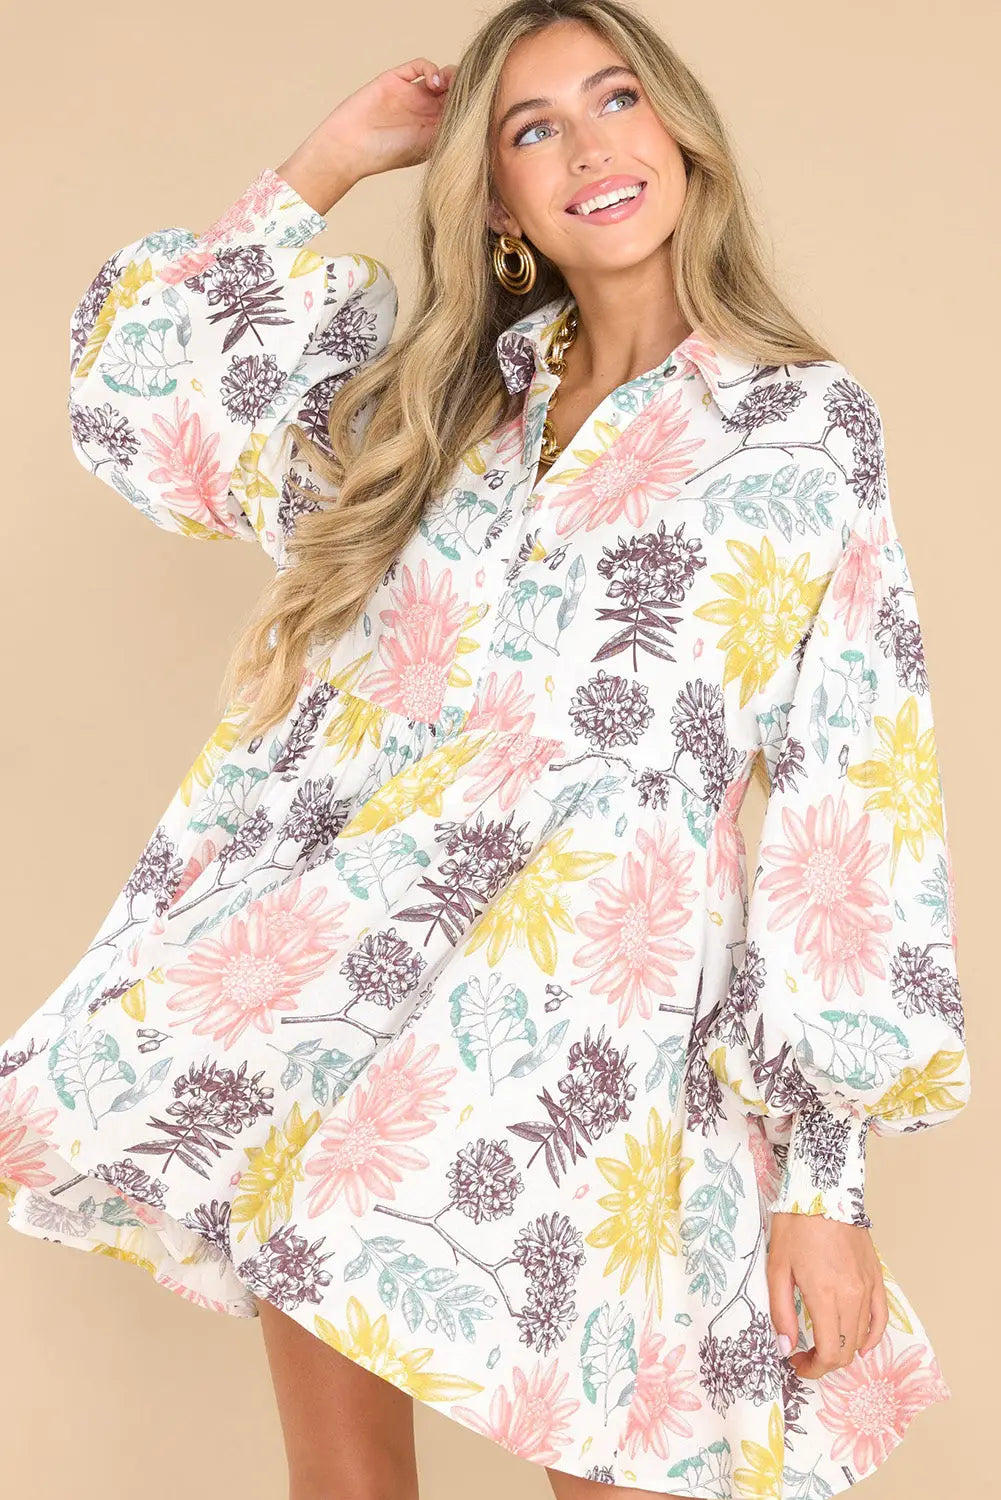 White collared neck bubble sleeve floral dress - dresses